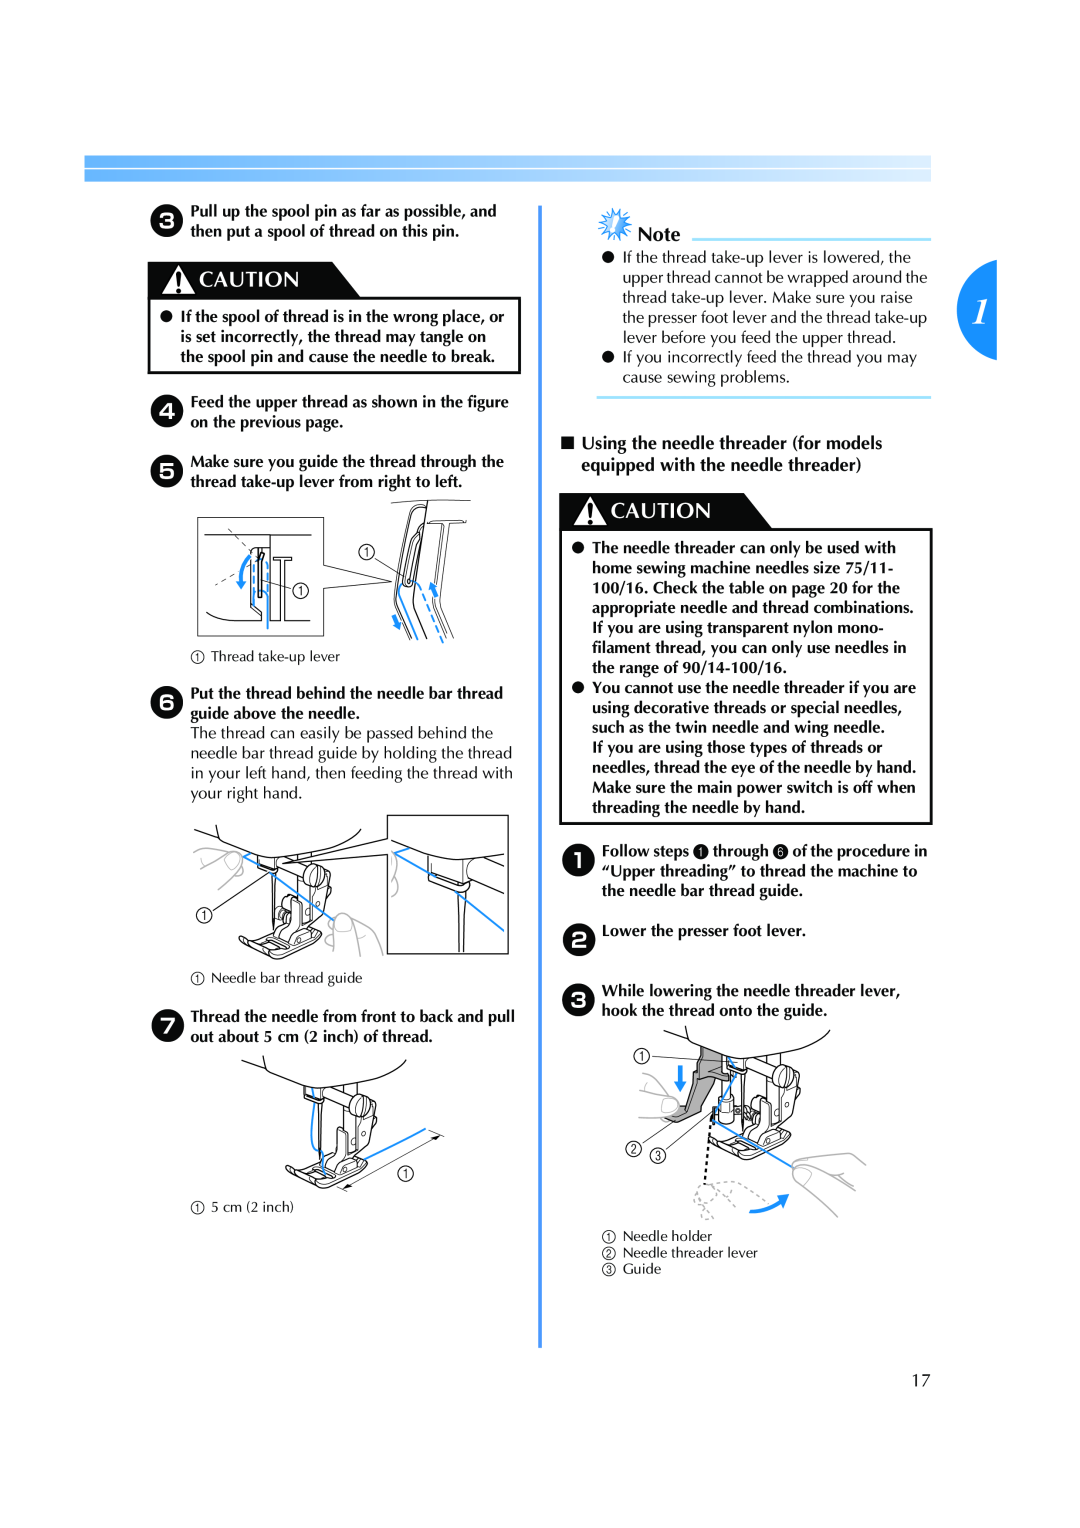 Brother ES 2000 operation manual dFeed the upper thread as shown in the figure on the previous page 